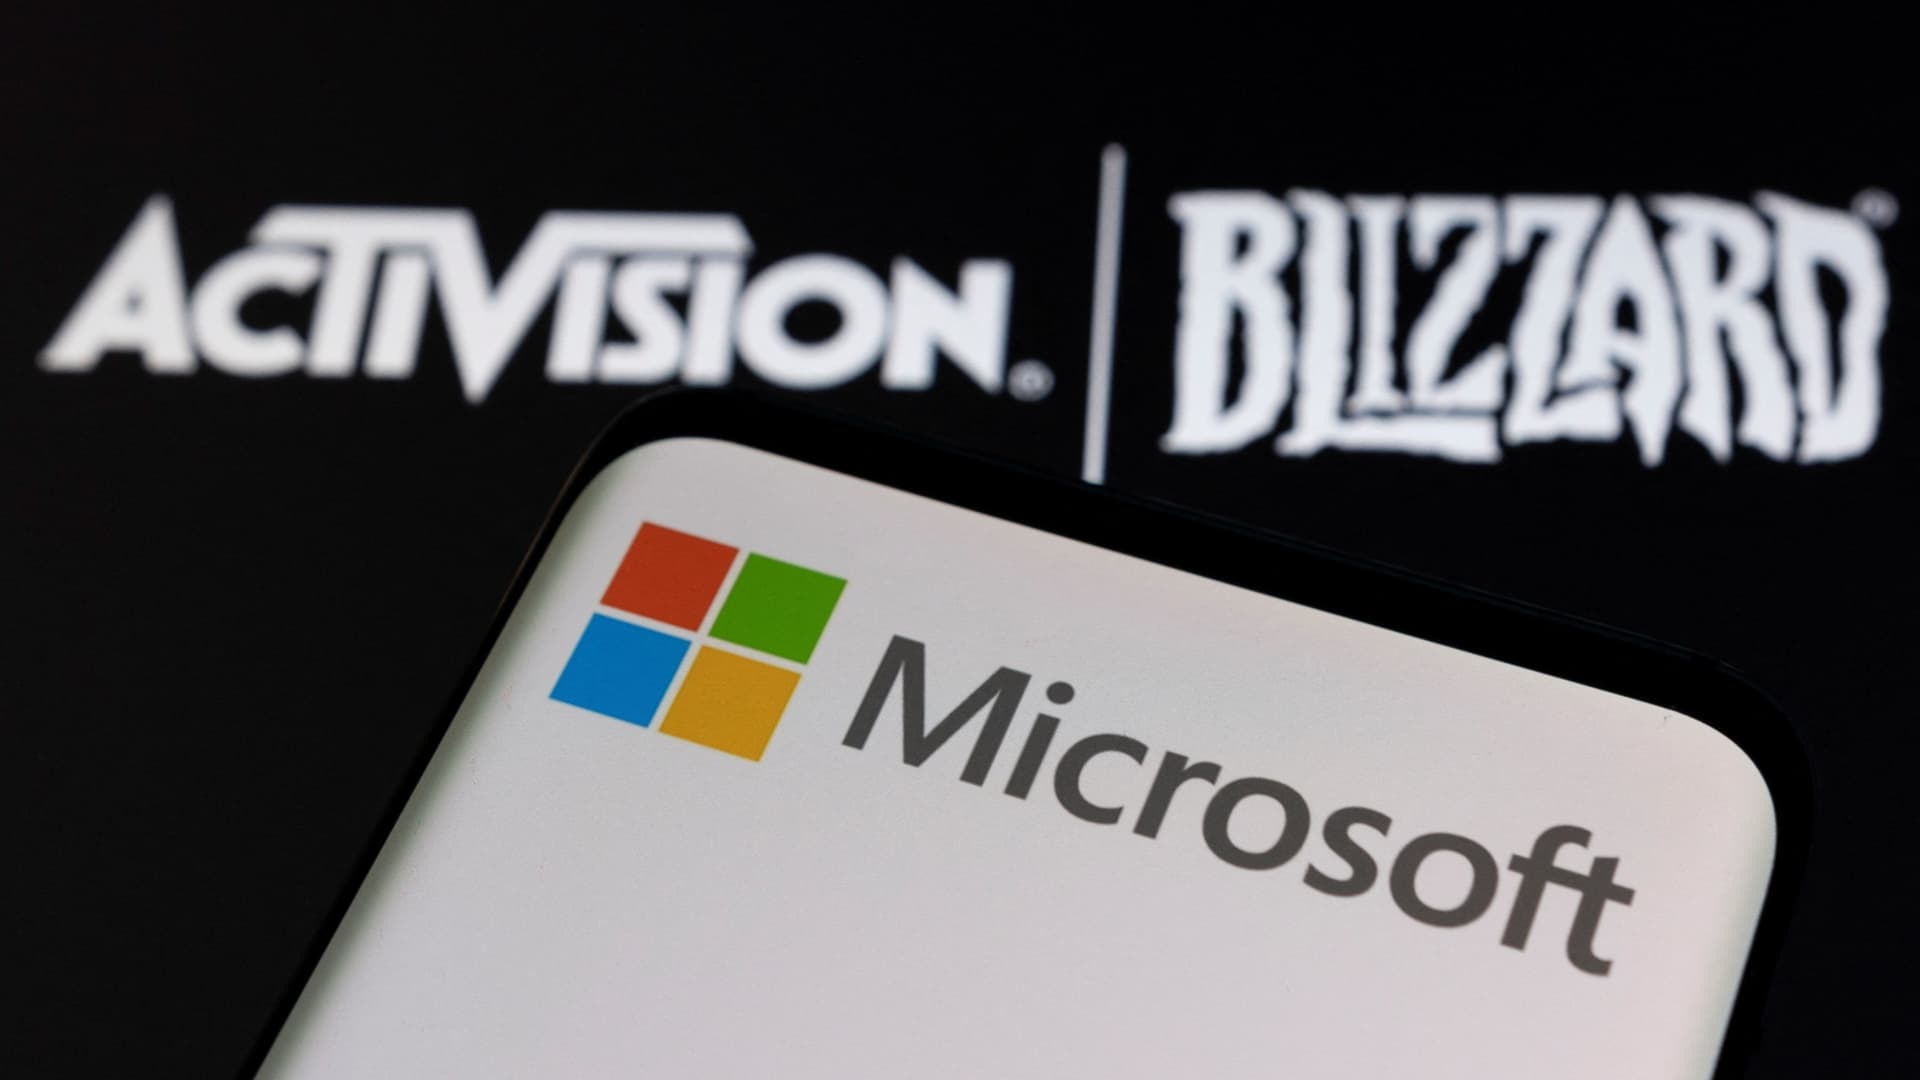 Nvidia supports Microsoft, Activision merger after Xbox game deal